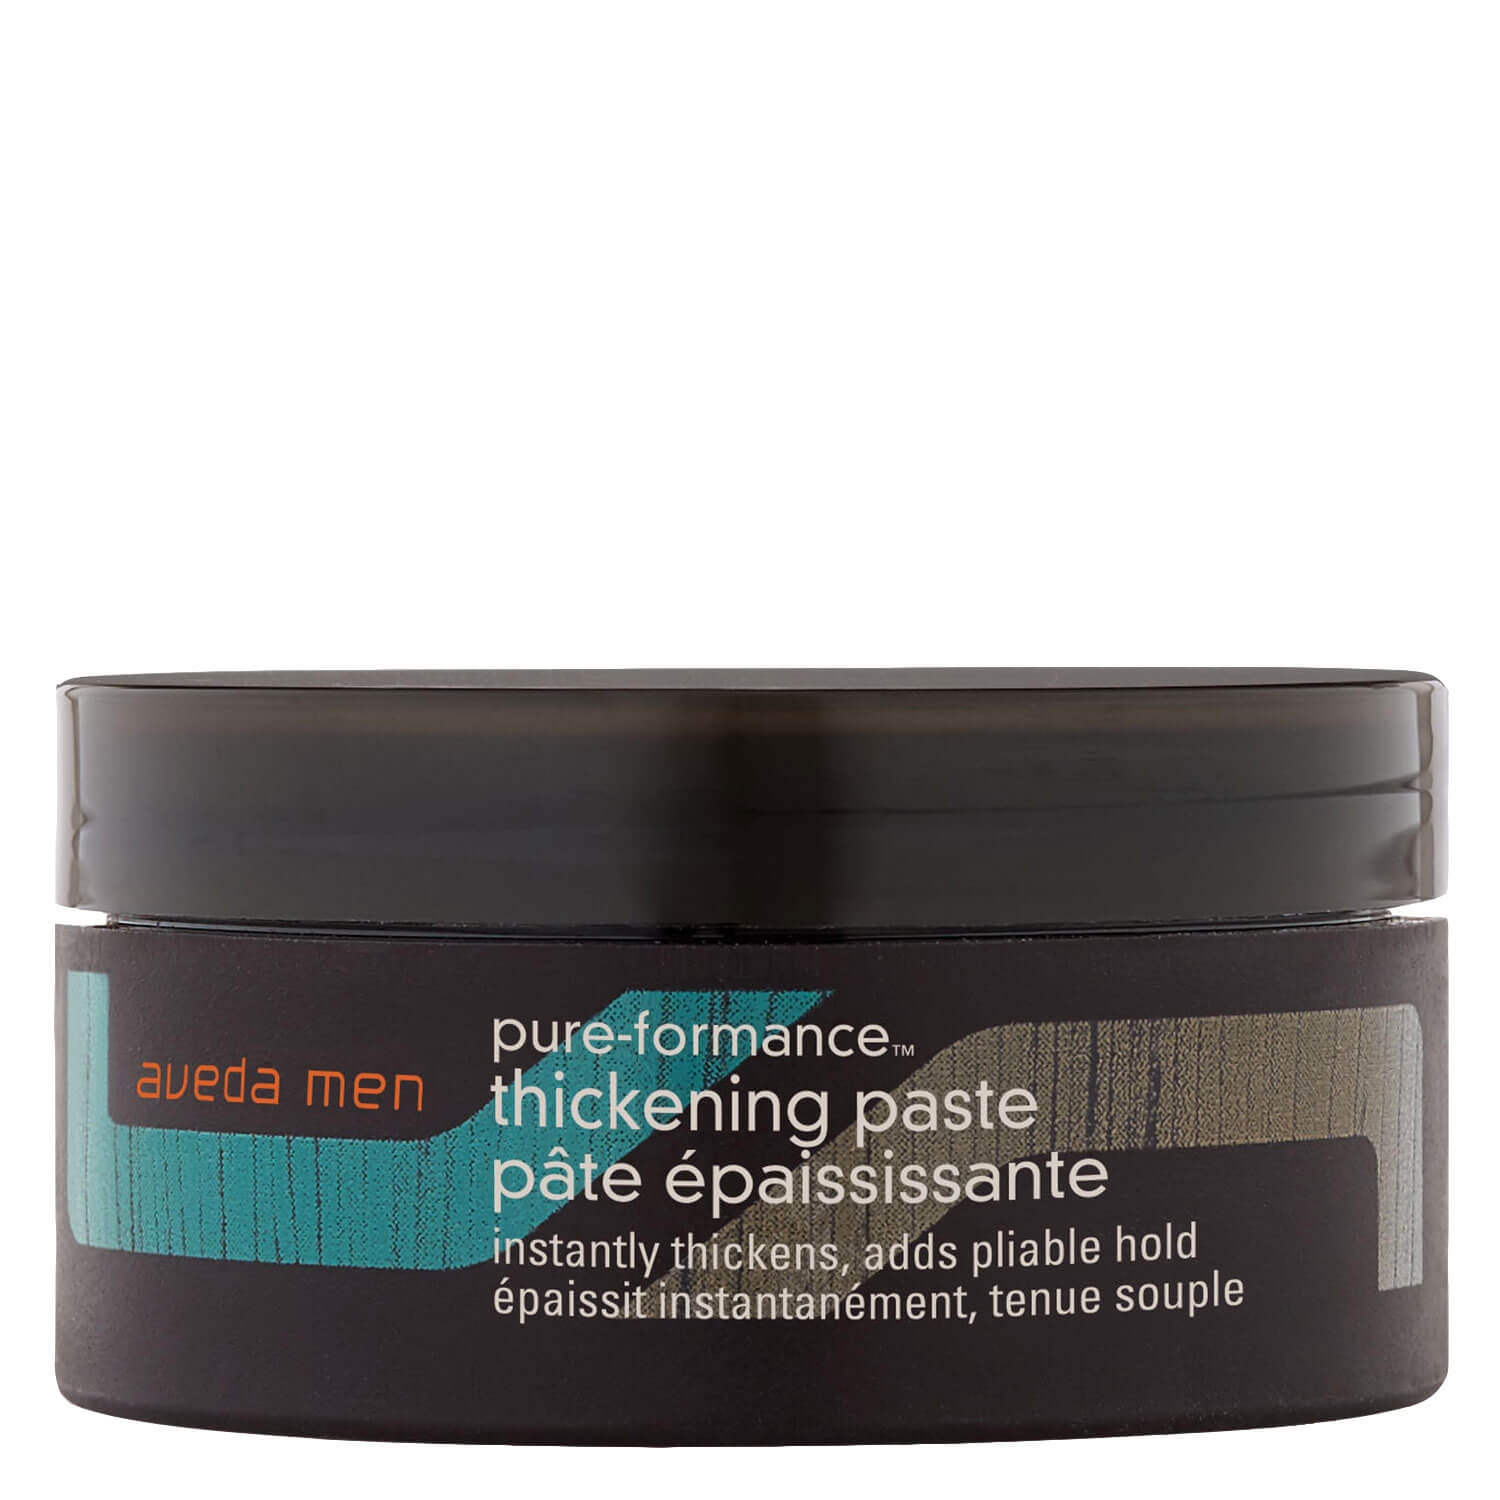 Product image from men pure-formance - thickening paste